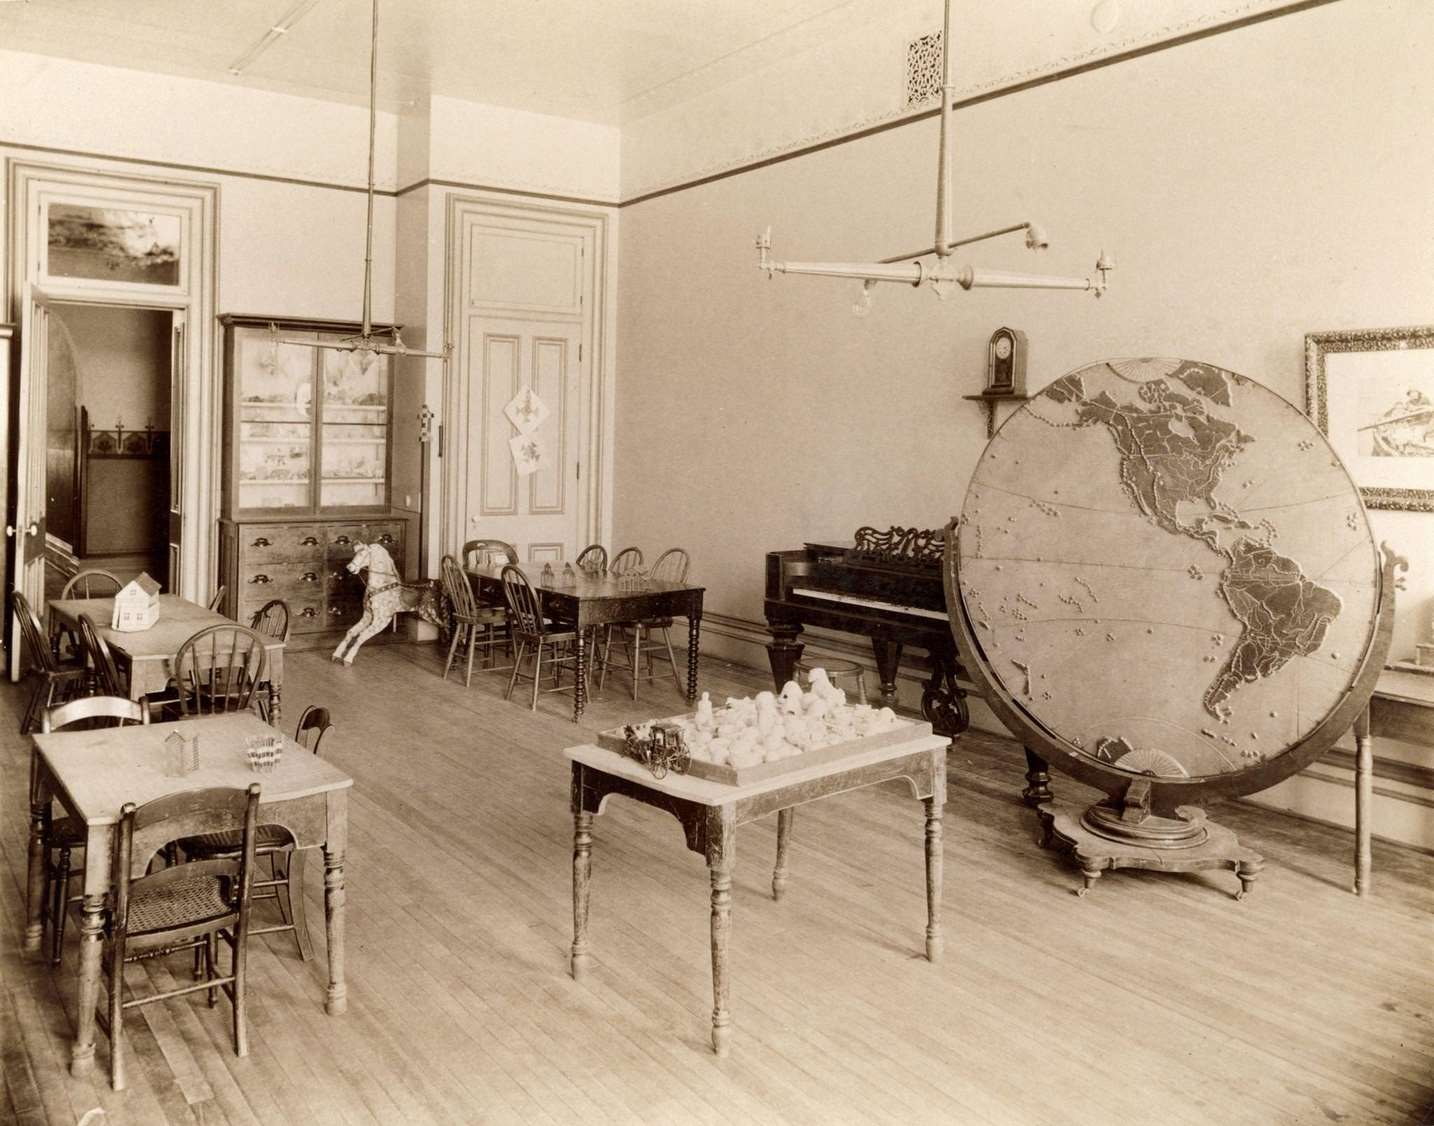 Interior of the State School for the Blind, perhaps a study or room for recreation, Janesville, Wisconsin, 1893.